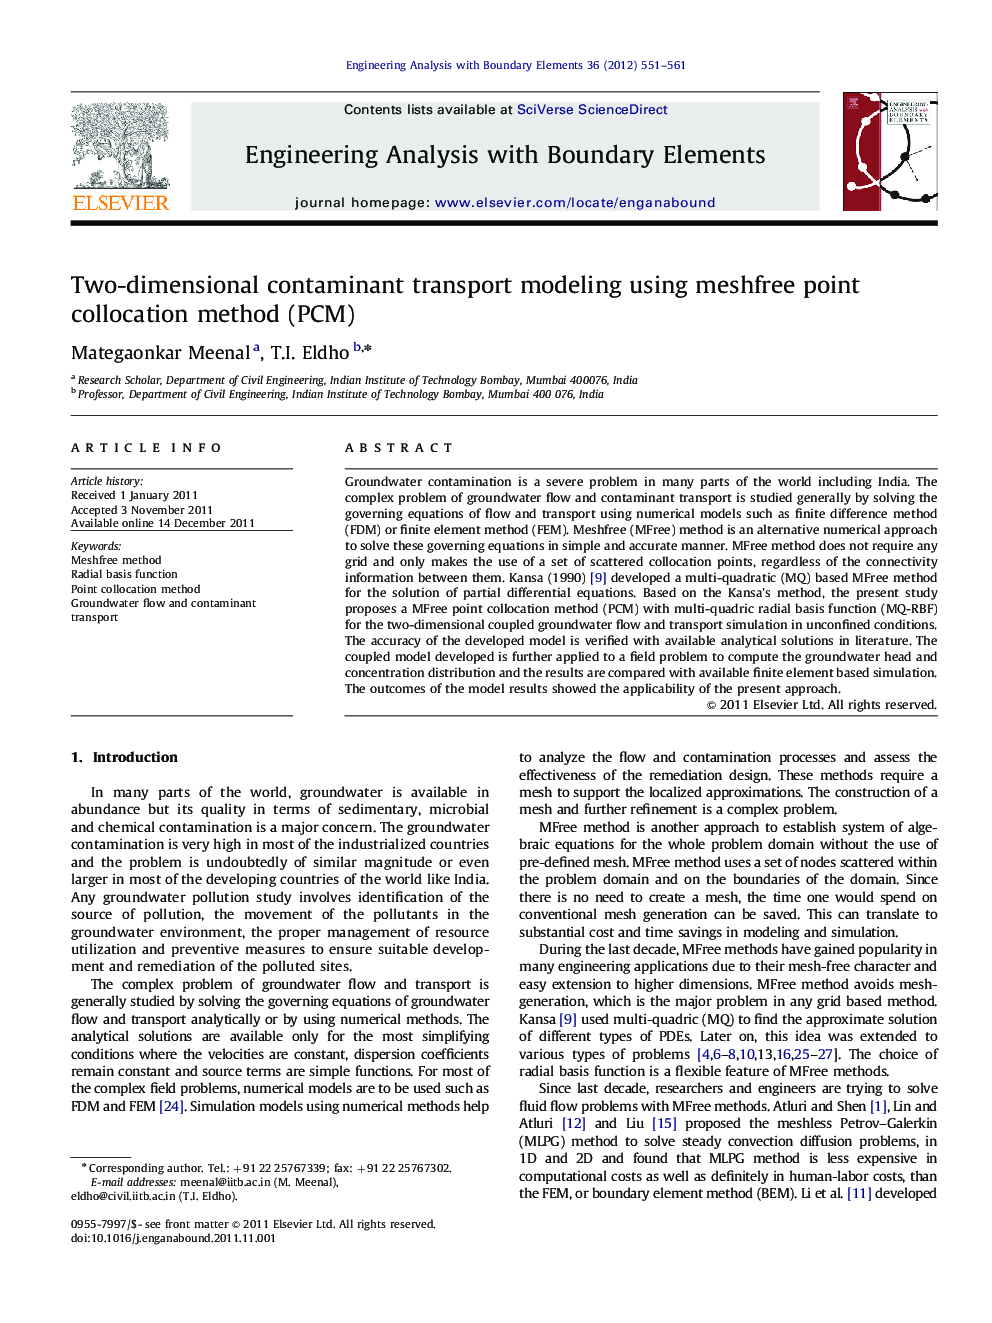 Two-dimensional contaminant transport modeling using meshfree point collocation method (PCM)